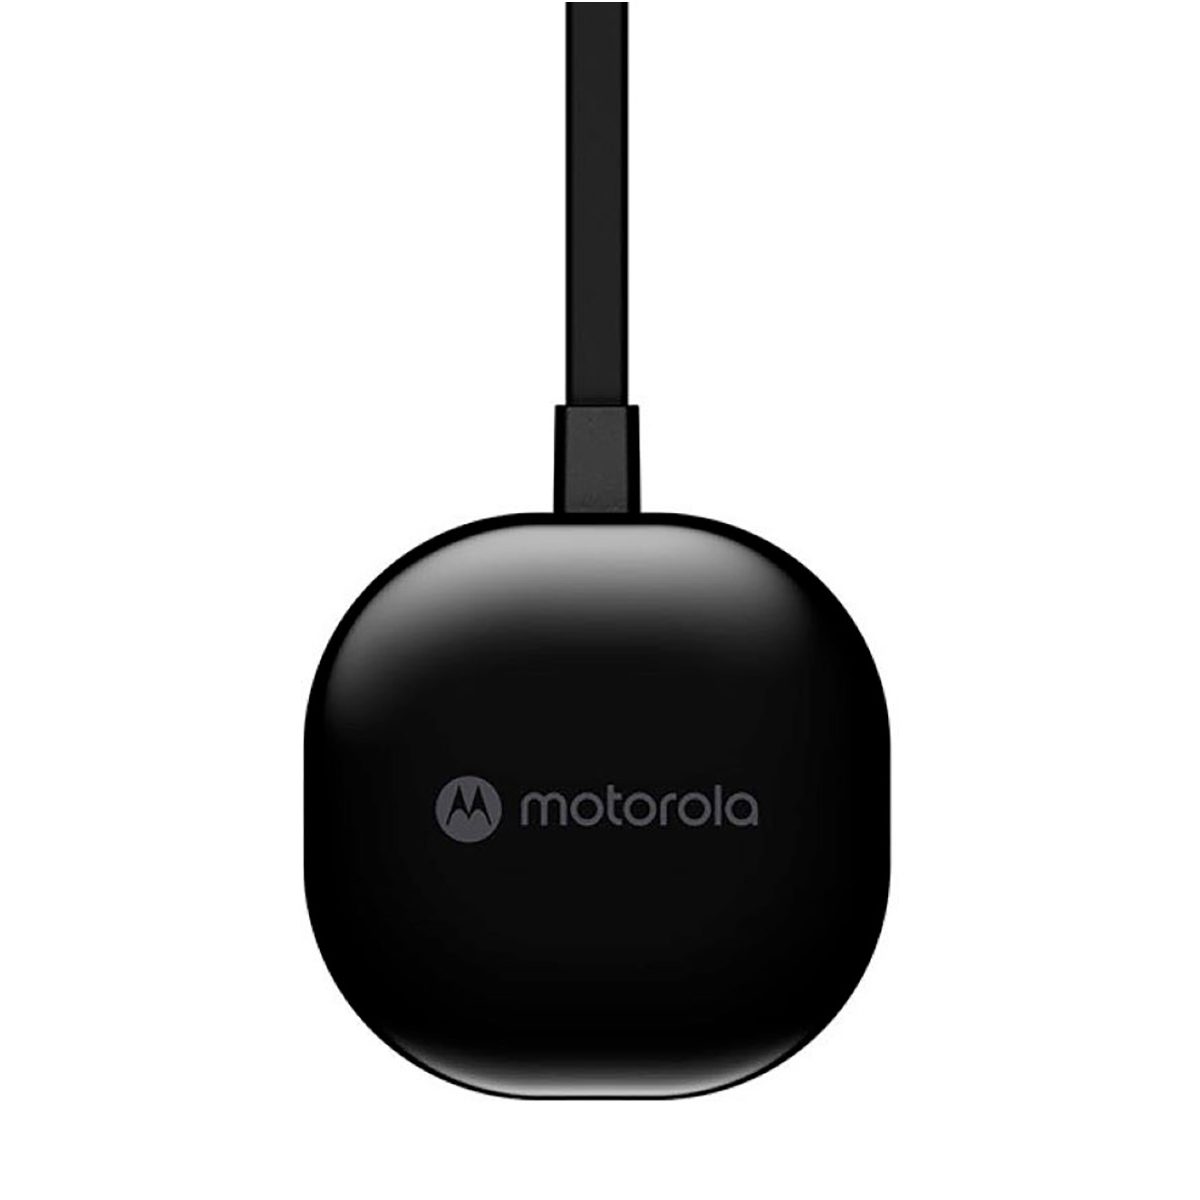 That Sweet Motorola Wireless Android Auto Dongle is Up for Pre-Order